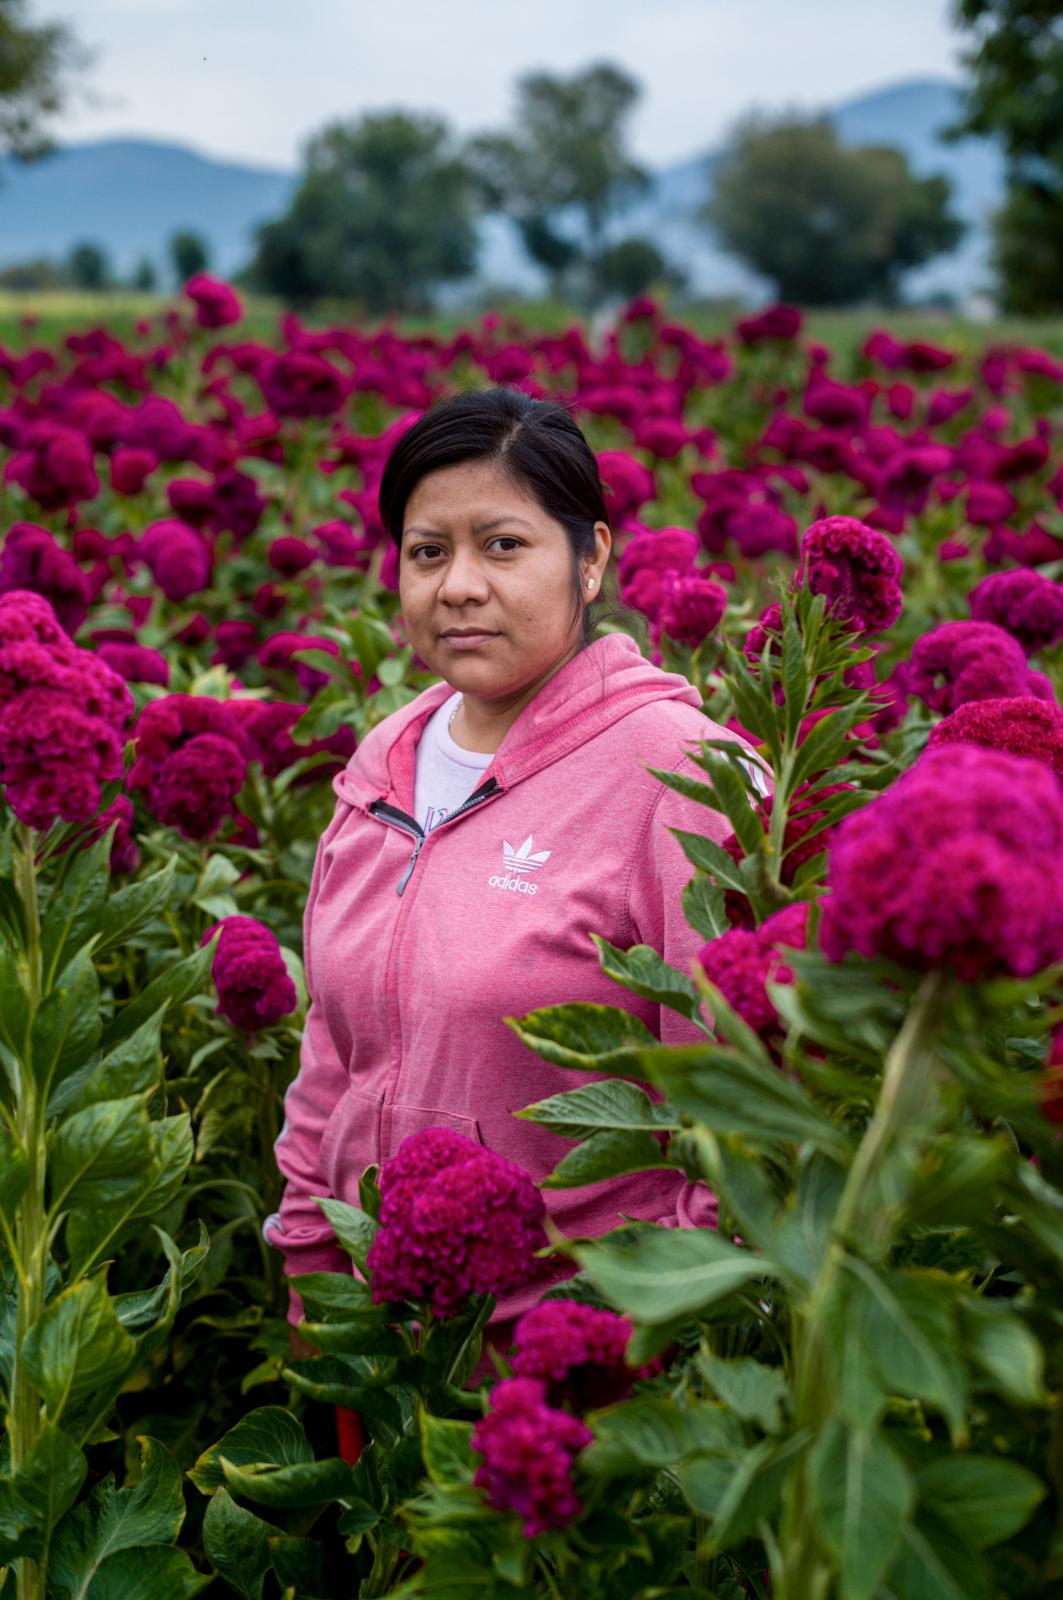 NPR - Meet the families harvesting the flowers that guide souls home on the Day of the Dead